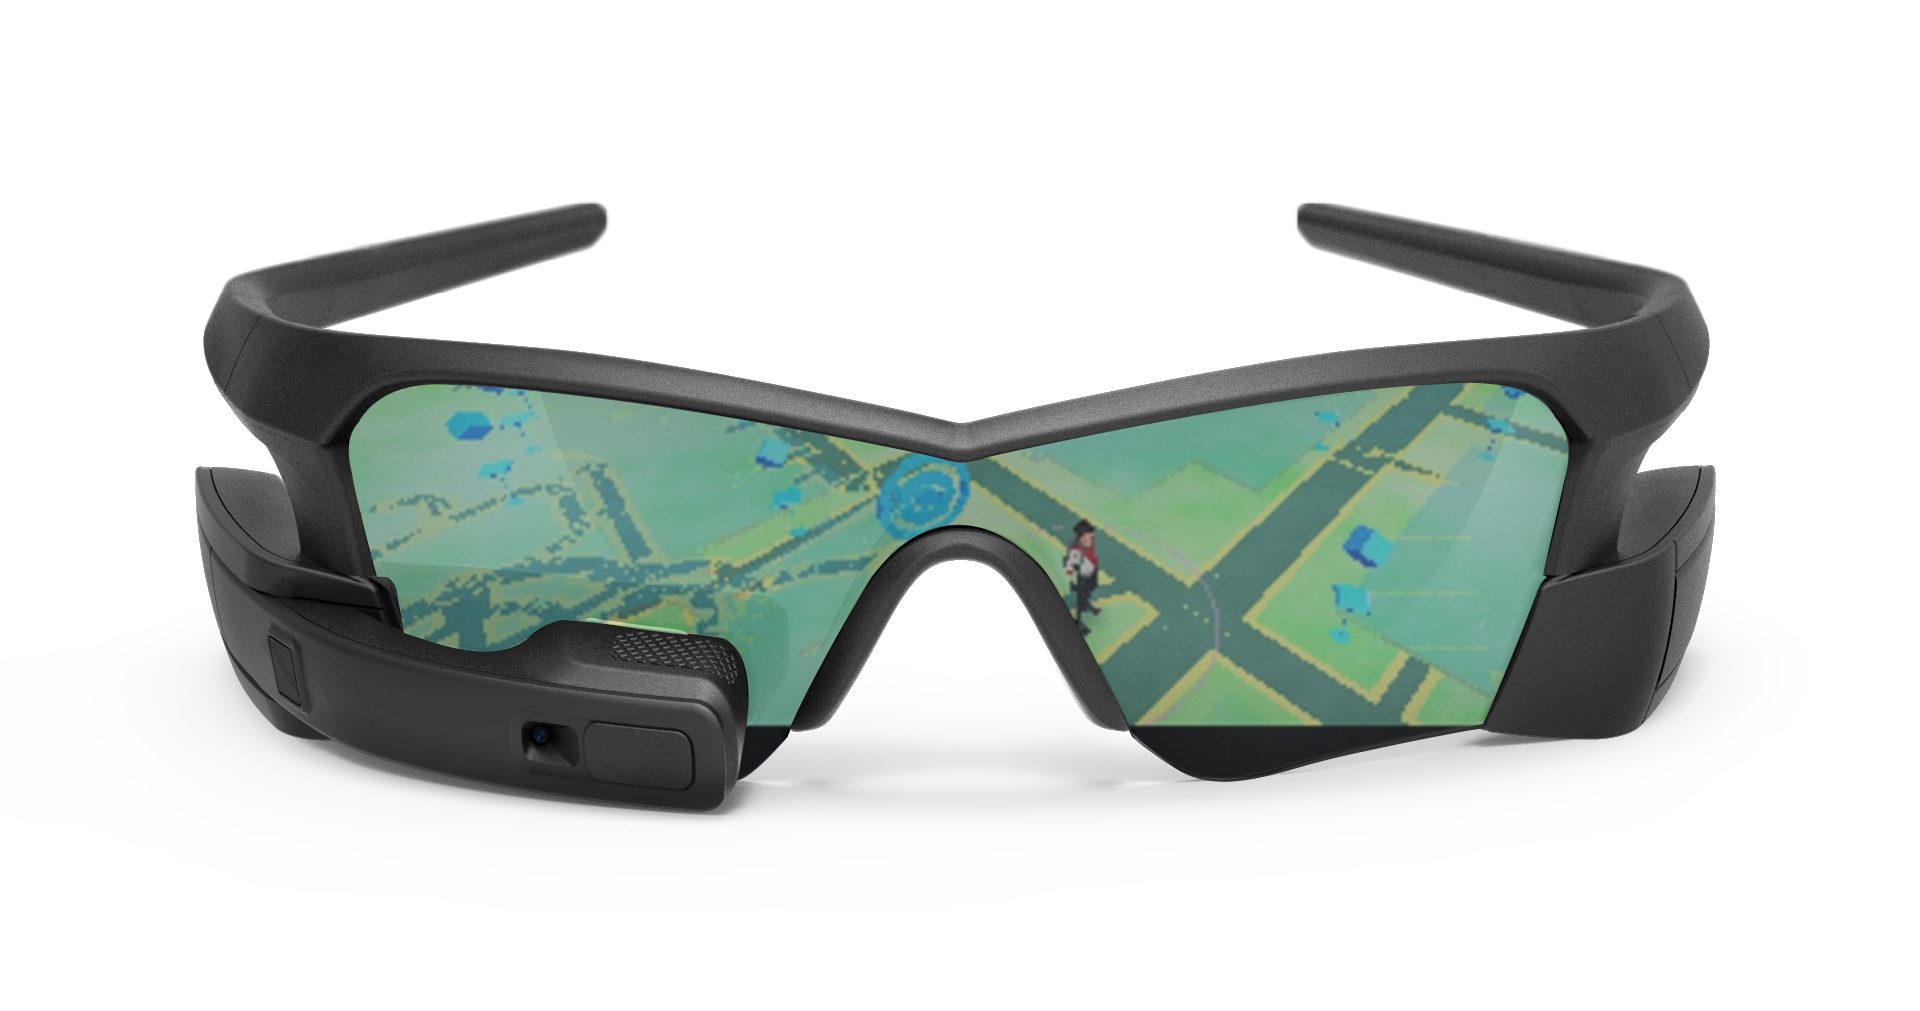 Play Pokémon GO hands-free with these smart glasses sorta